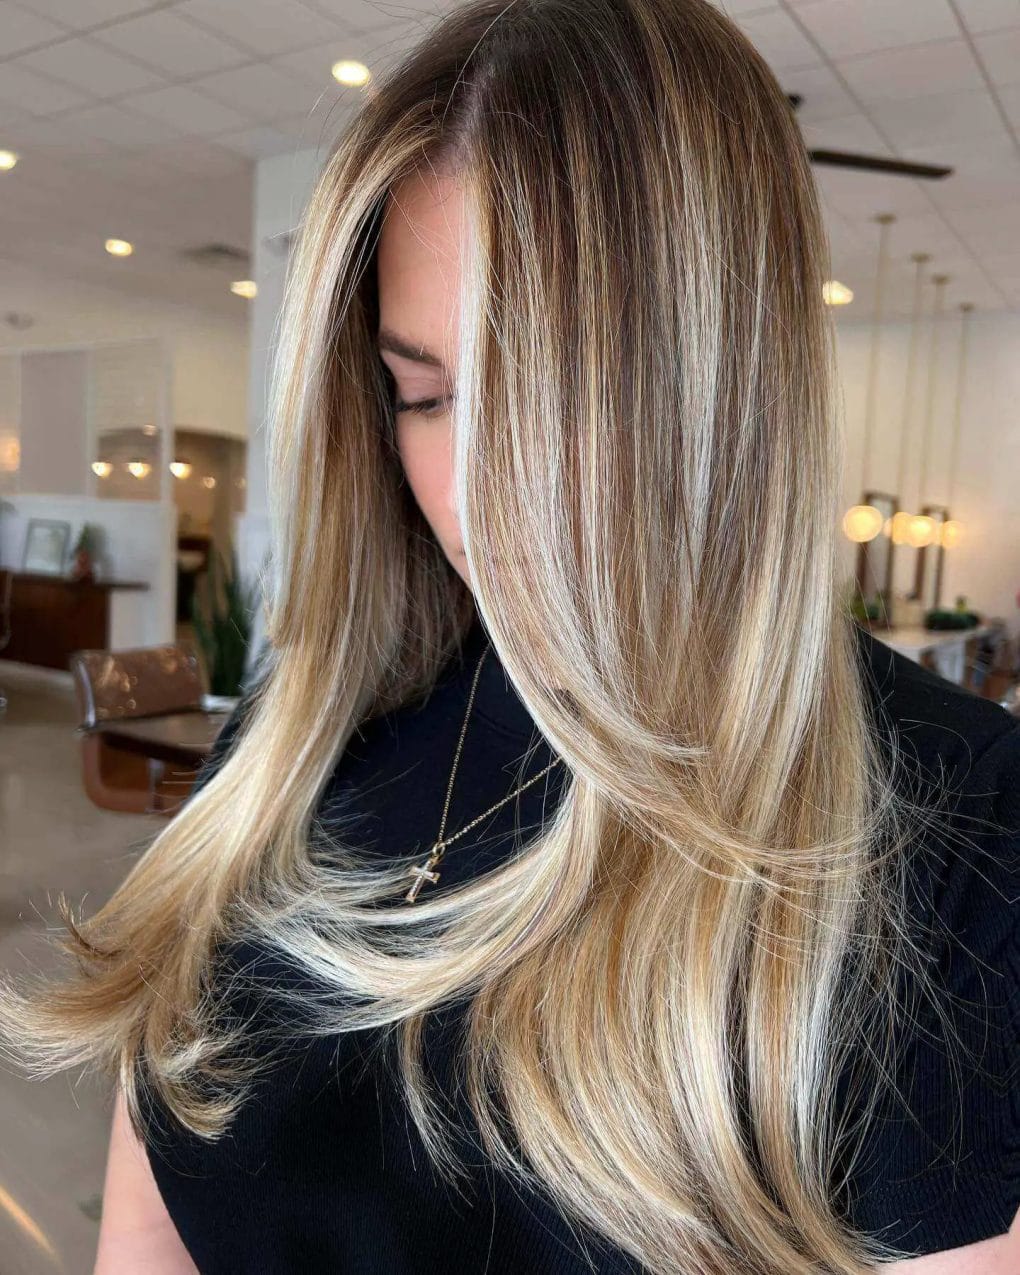 Long hair with layered blowout, voluminous waves, and blonde highlights.